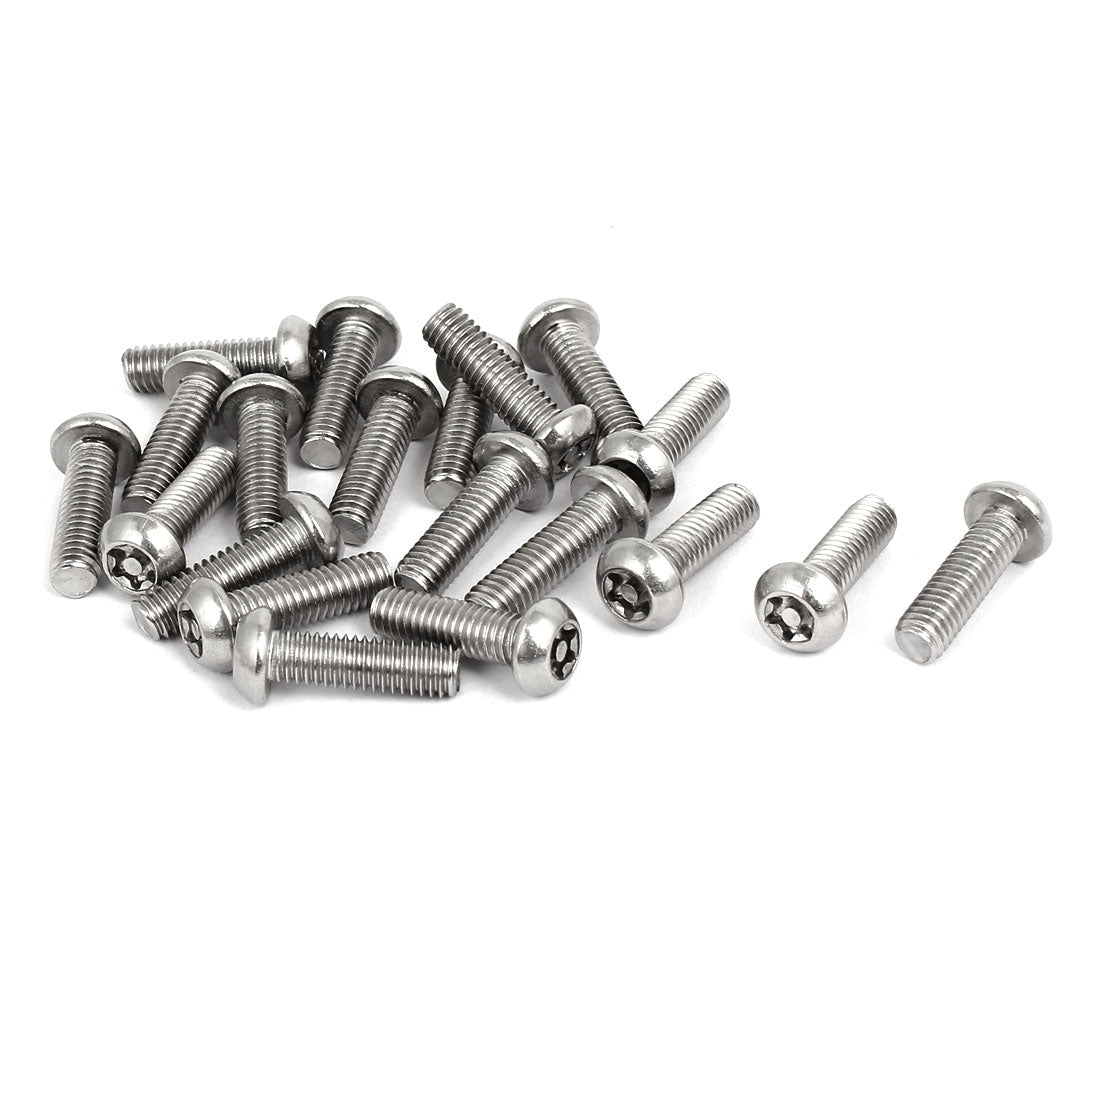 uxcell Uxcell M6x20mm 304 Stainless Steel Button Head Torx Security Tamper Proof Screws 20pcs